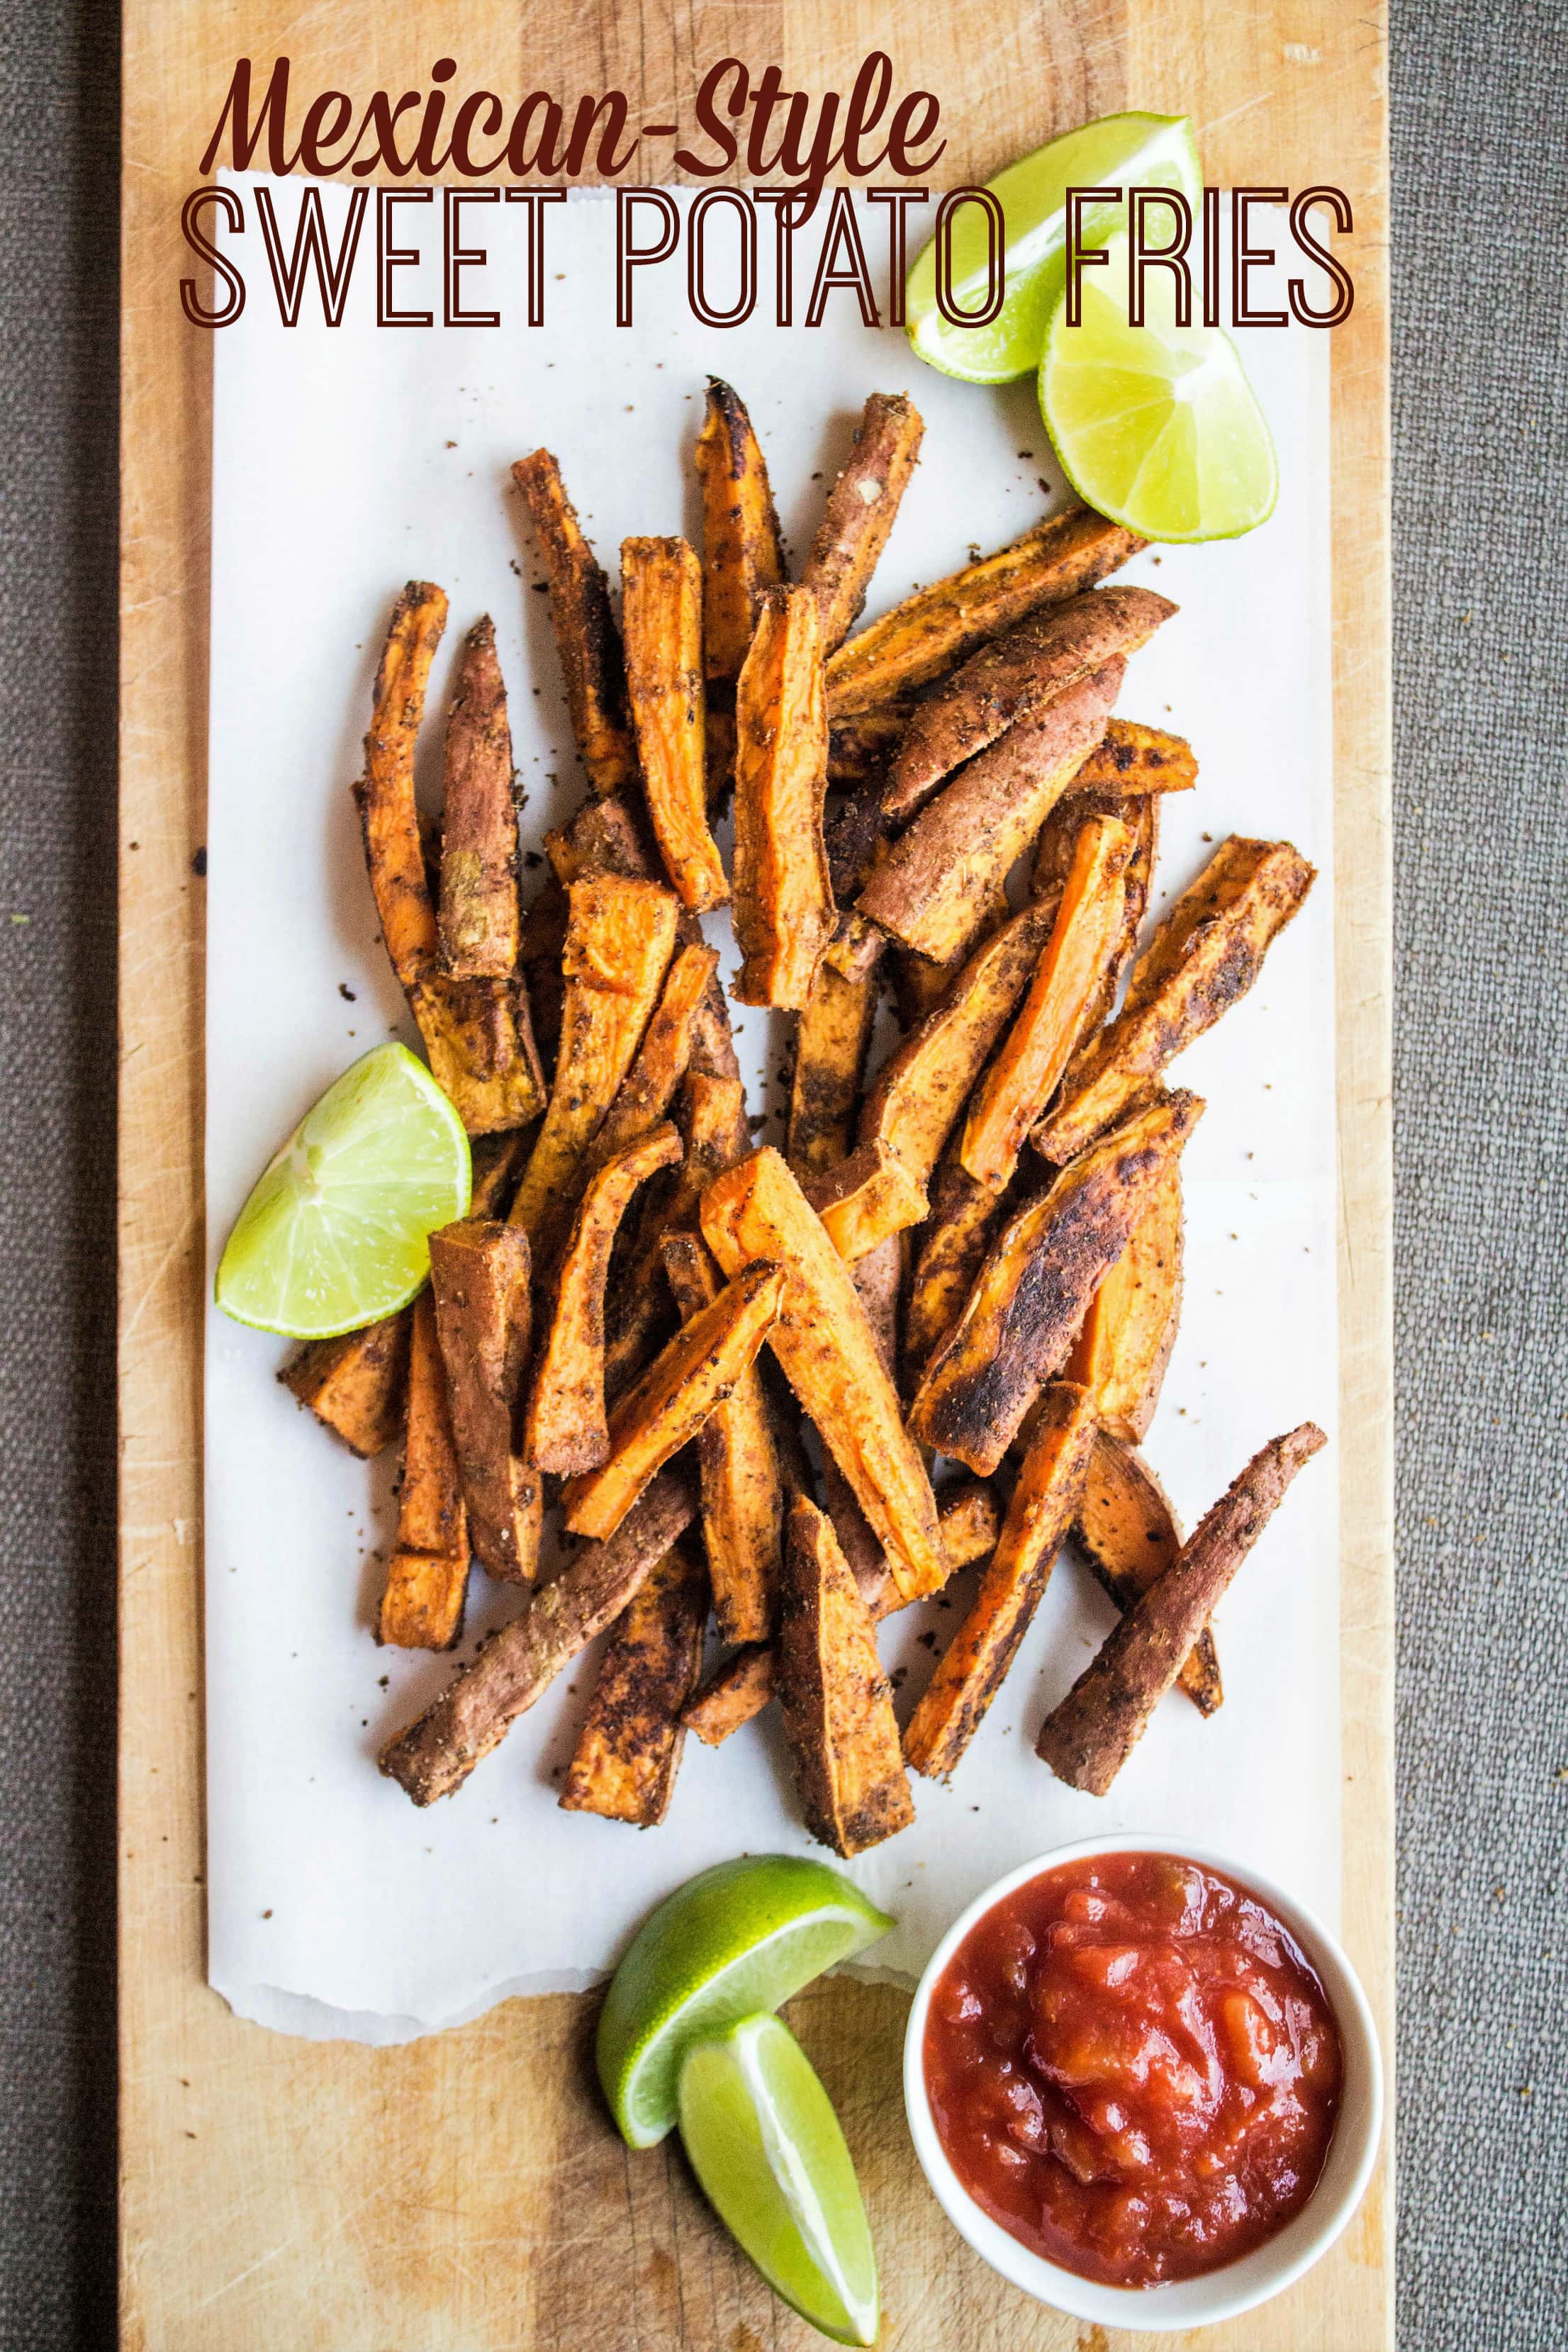 Baked Sweet Potato Fries Recipe: Mexican-Style - fANNEtastic food